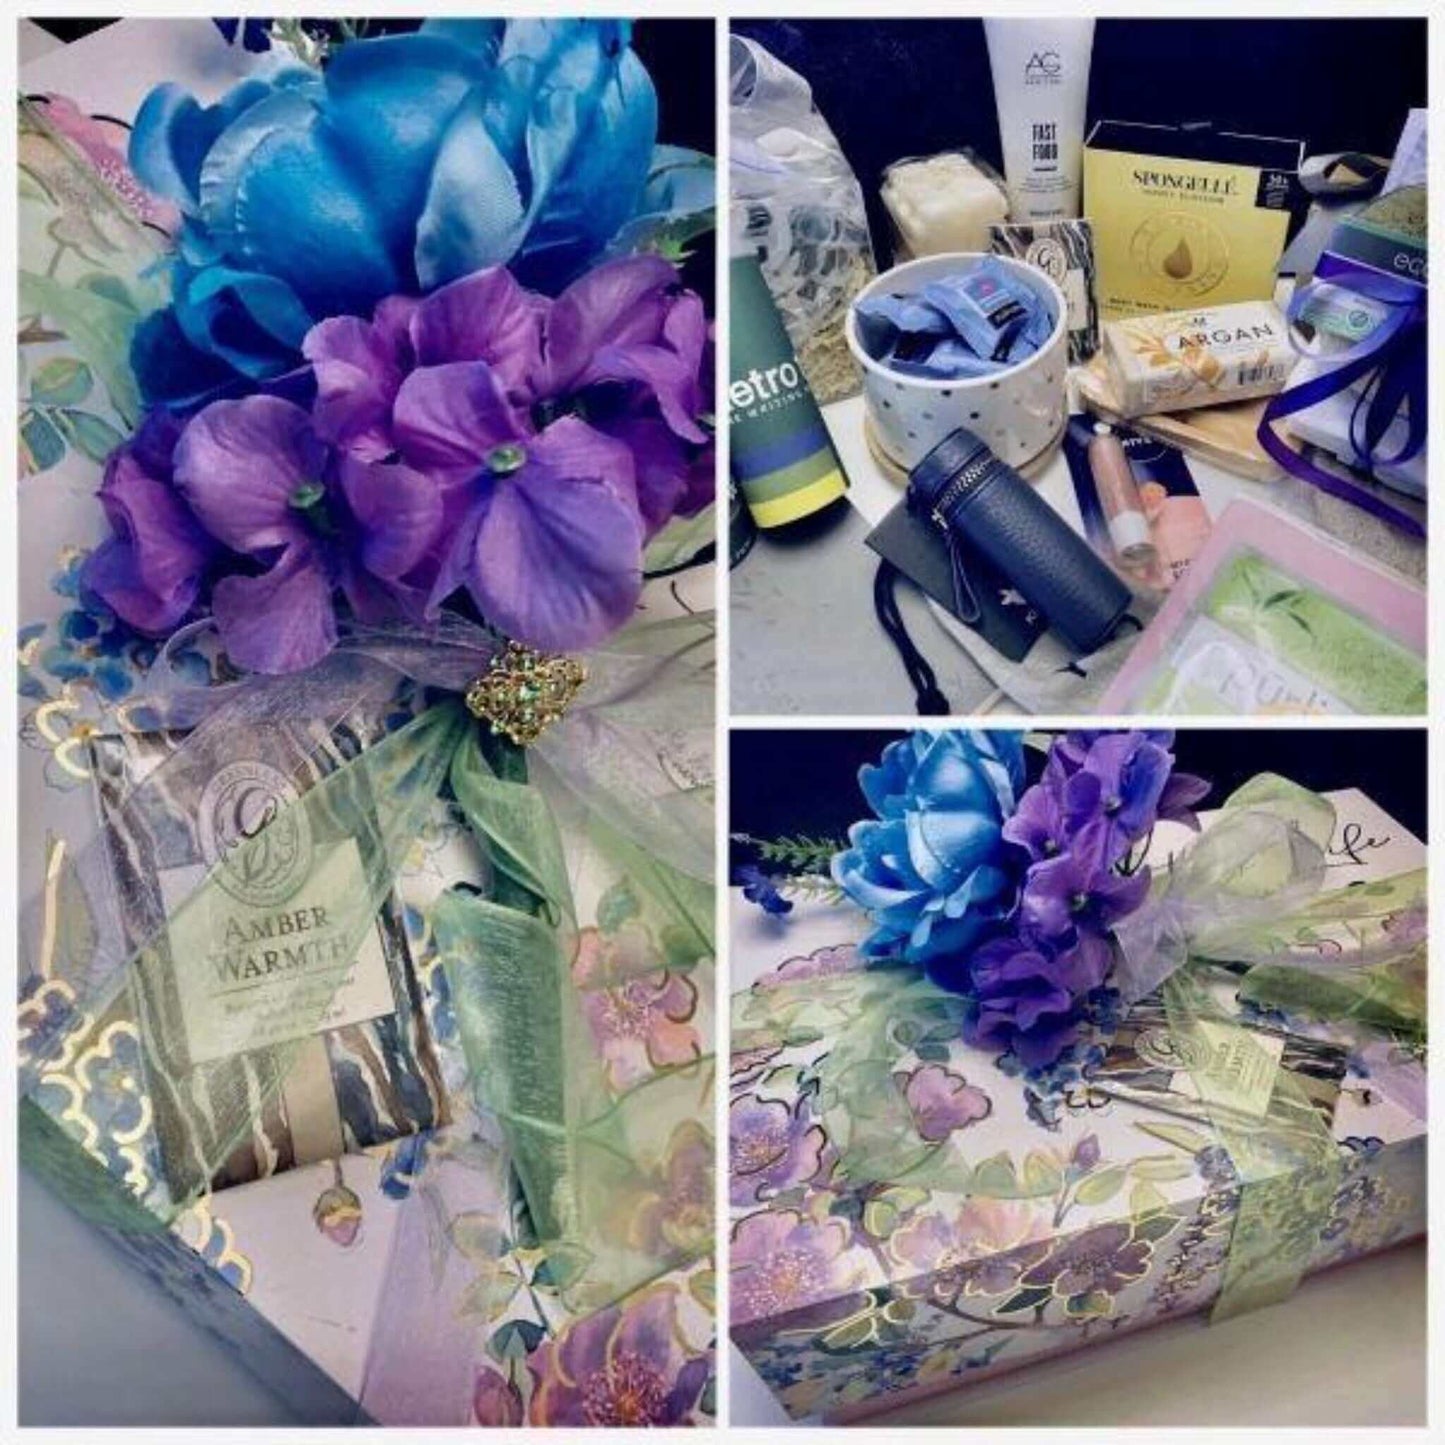 Personalized gift box featuring blue and purple floral accents, wrapped toiletries, and thoughtful personal items.